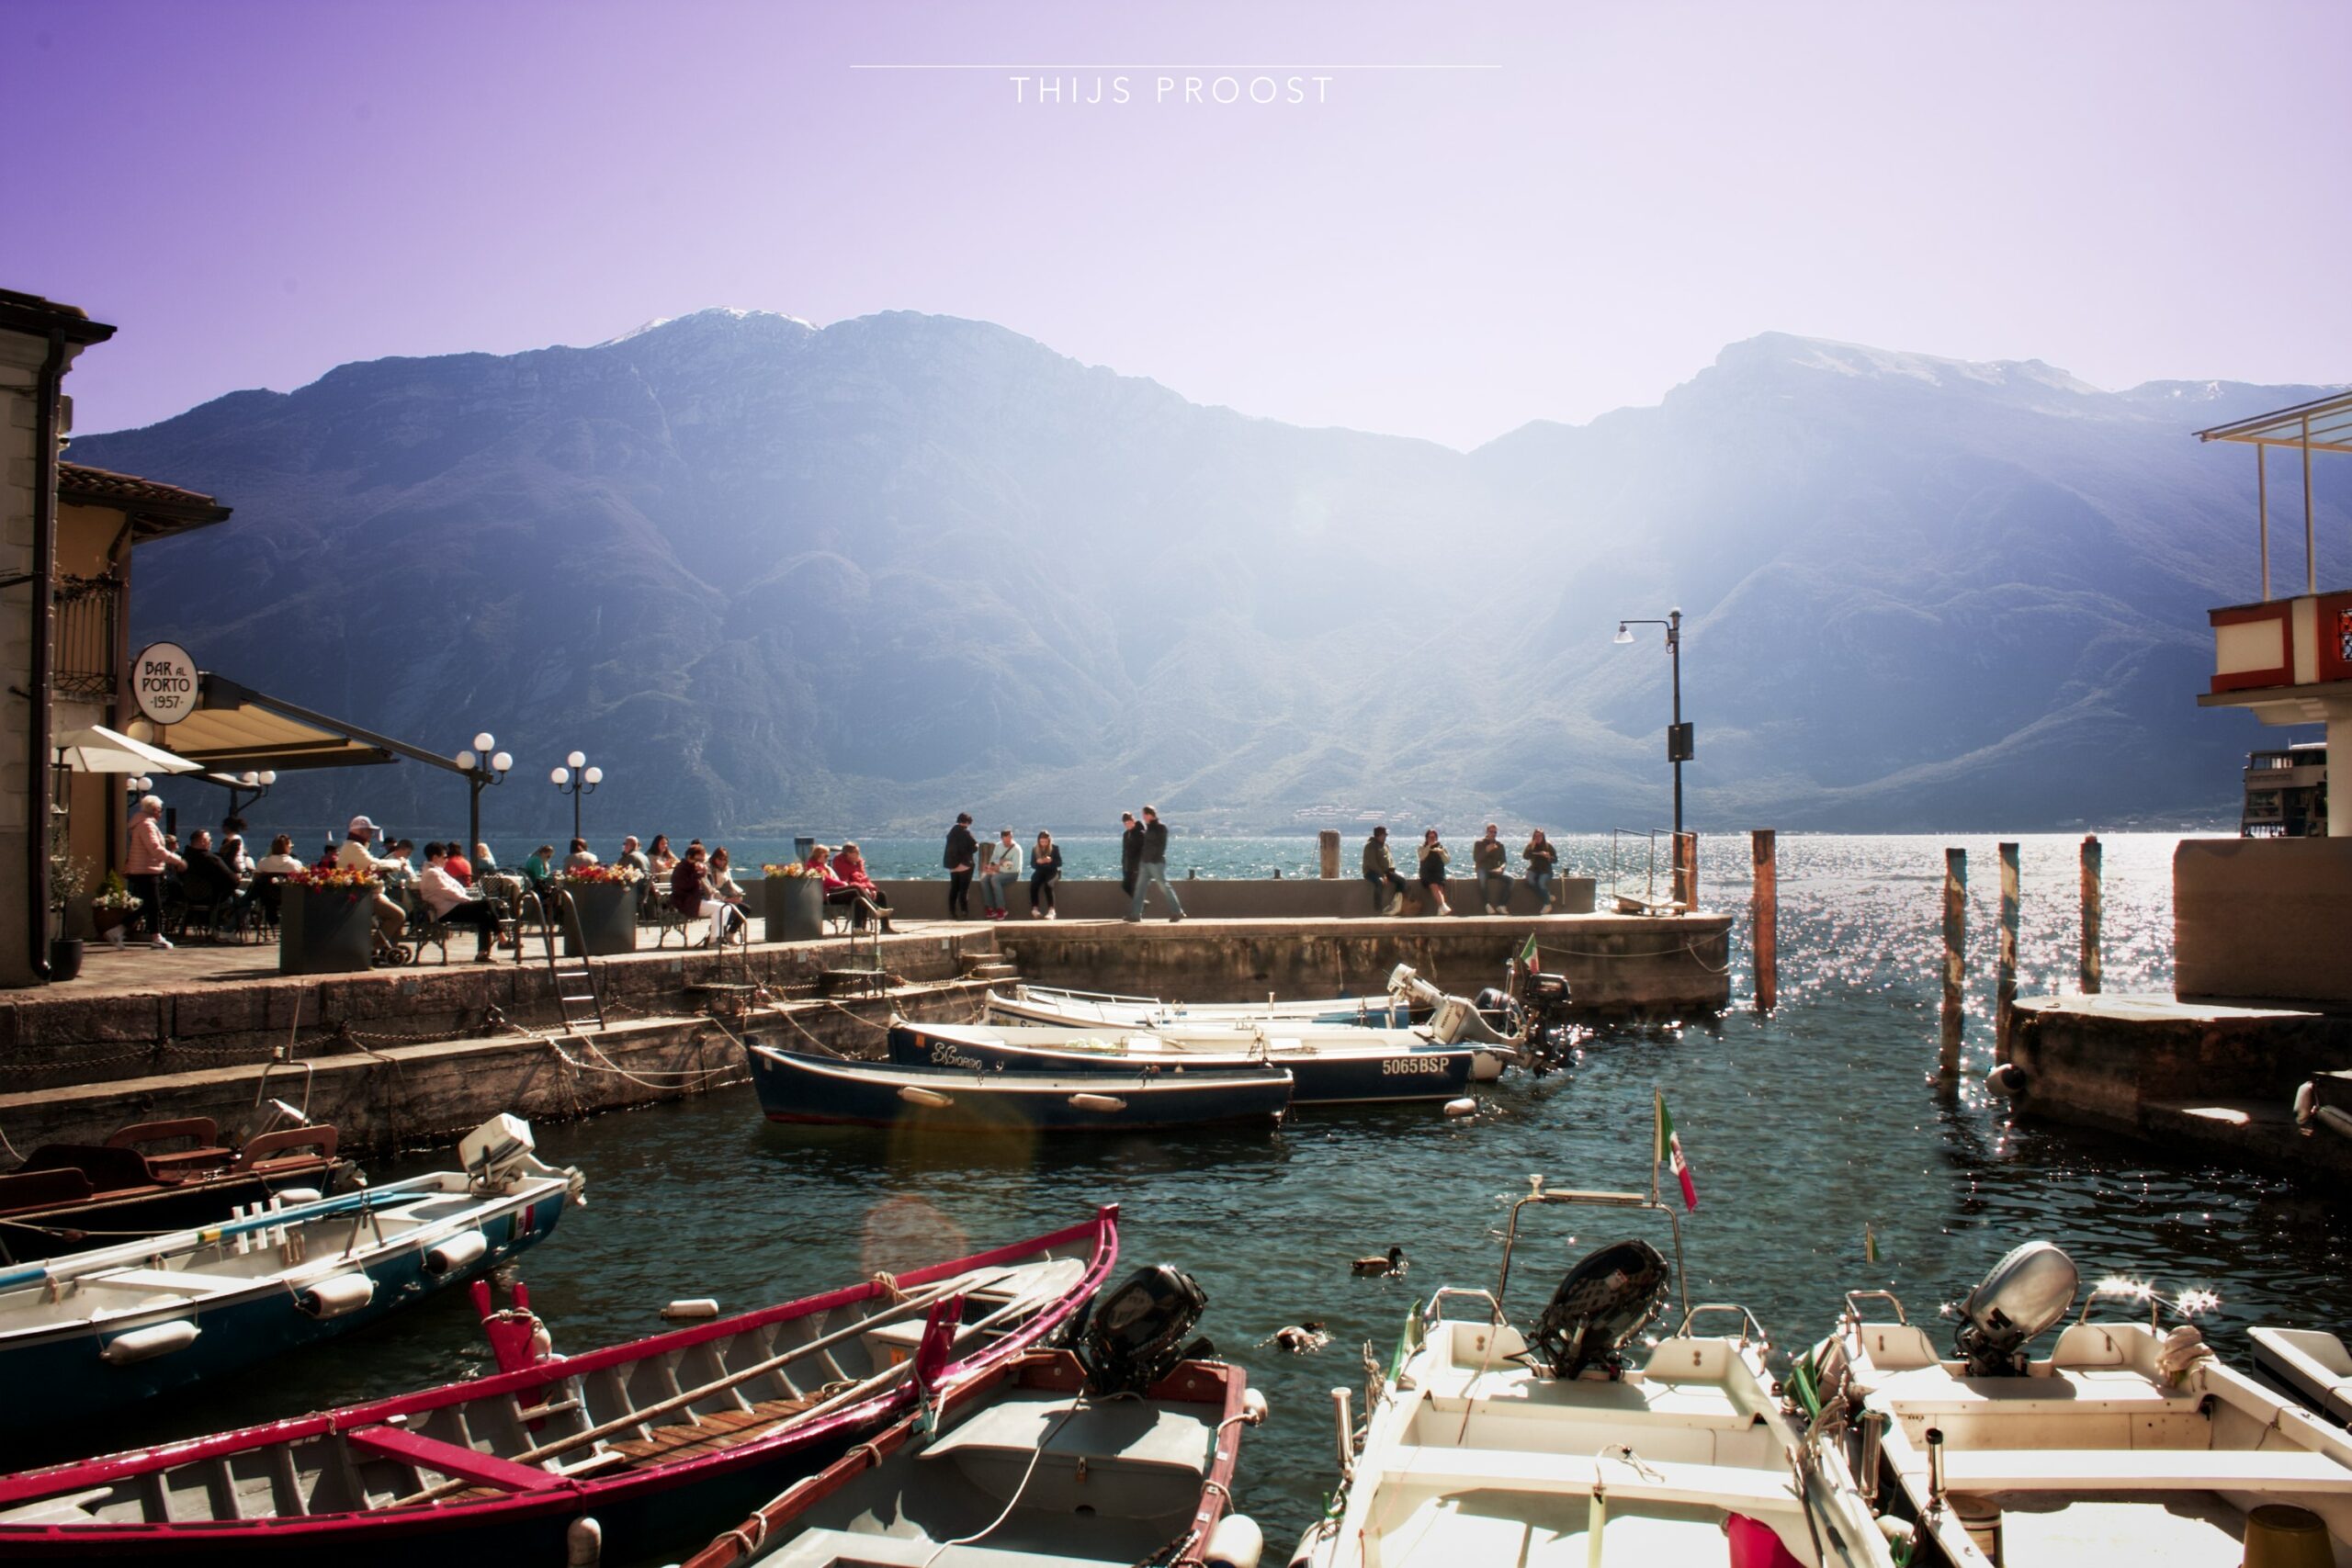 View of lake Garda. in the front are smal boots. A peer in front of the lake with people enjoying the sun. In the back are haze mountains with a clears blue sky.